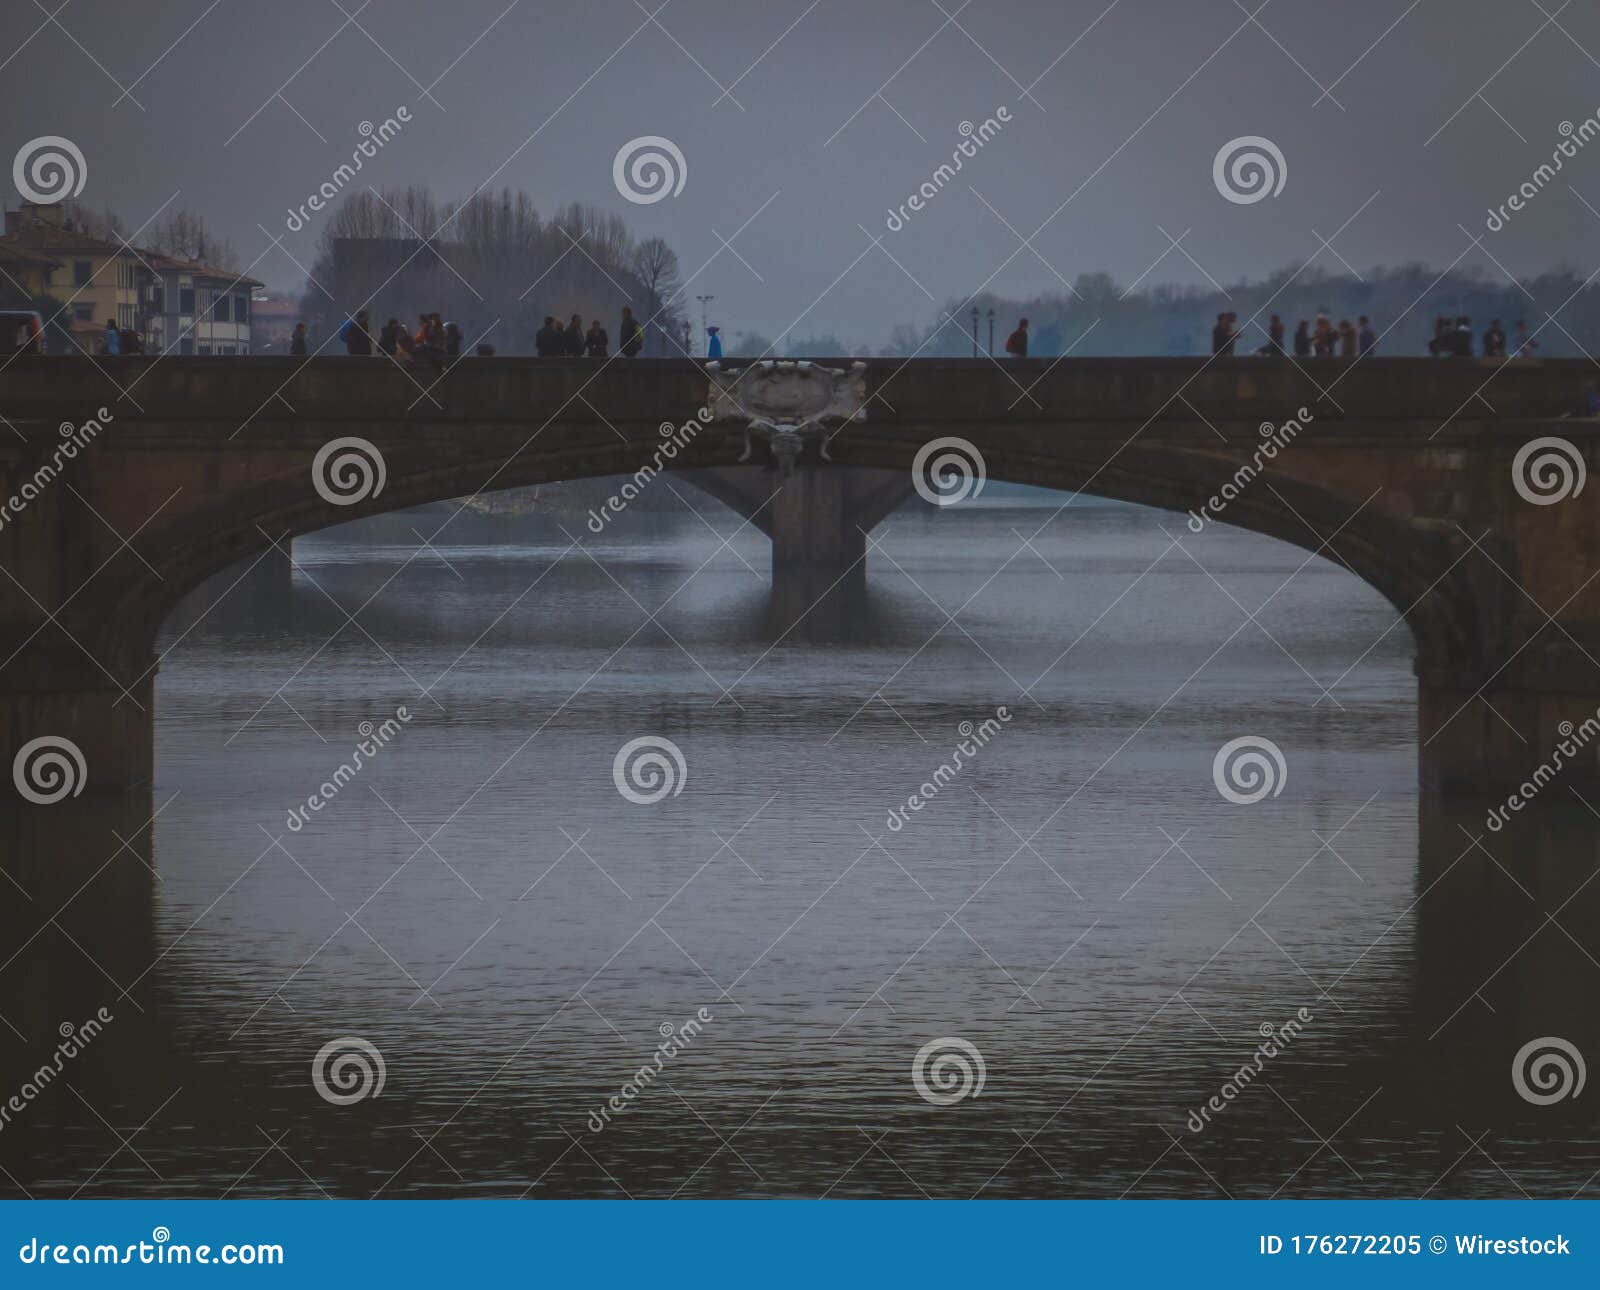 bridge over the water with people walking in florencia, italy